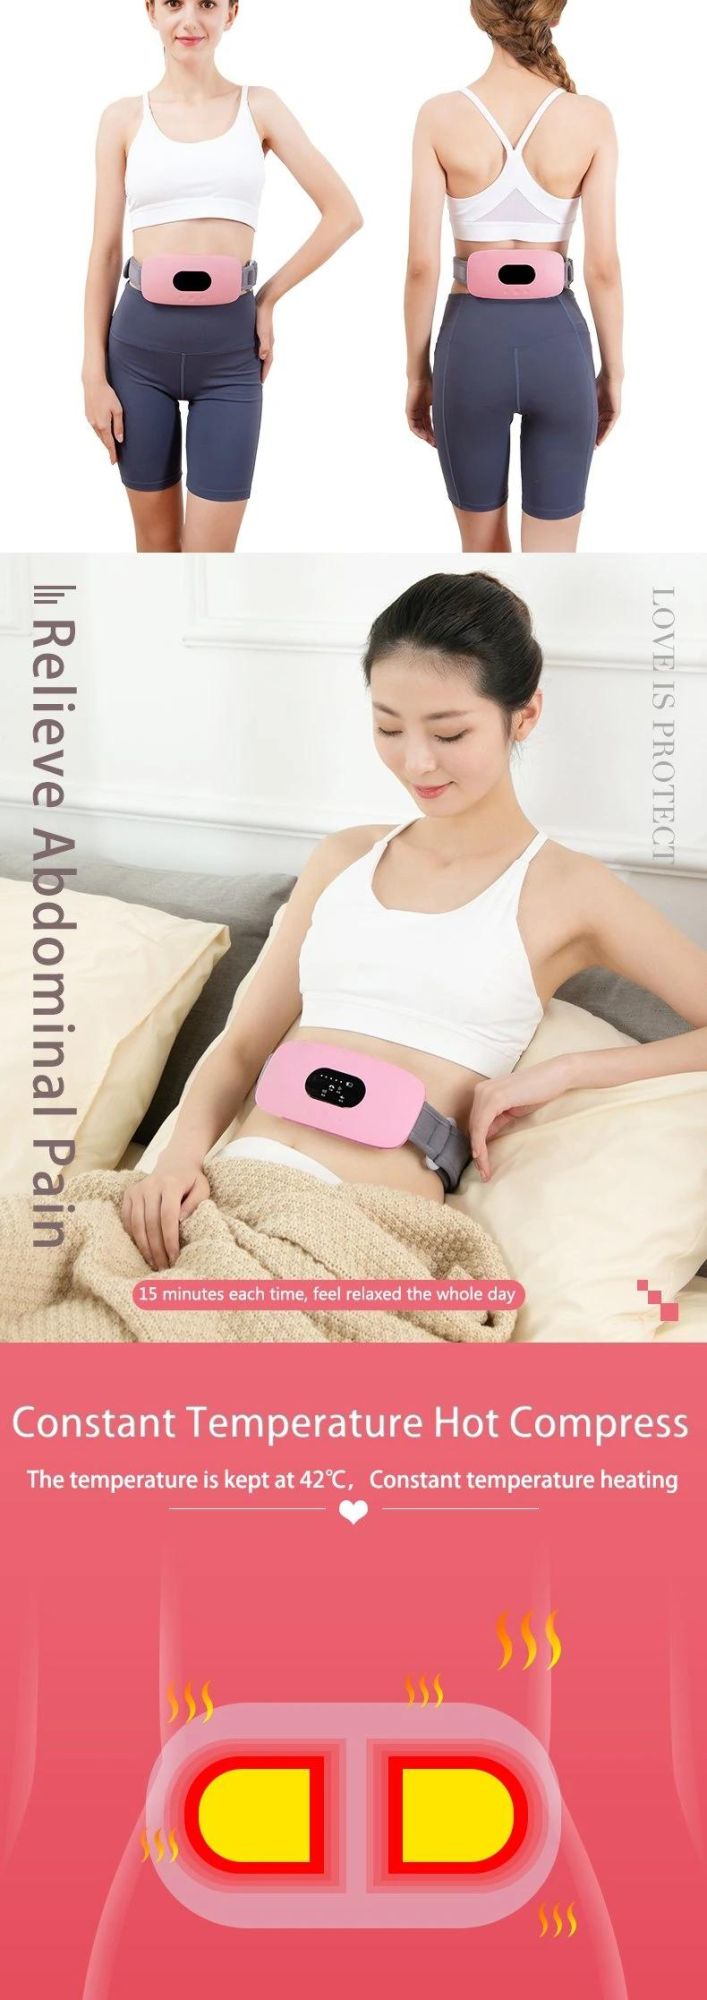 Hezheng Electric Slimming Massager Vibration Lose Weight Massage Belt with Heating Function